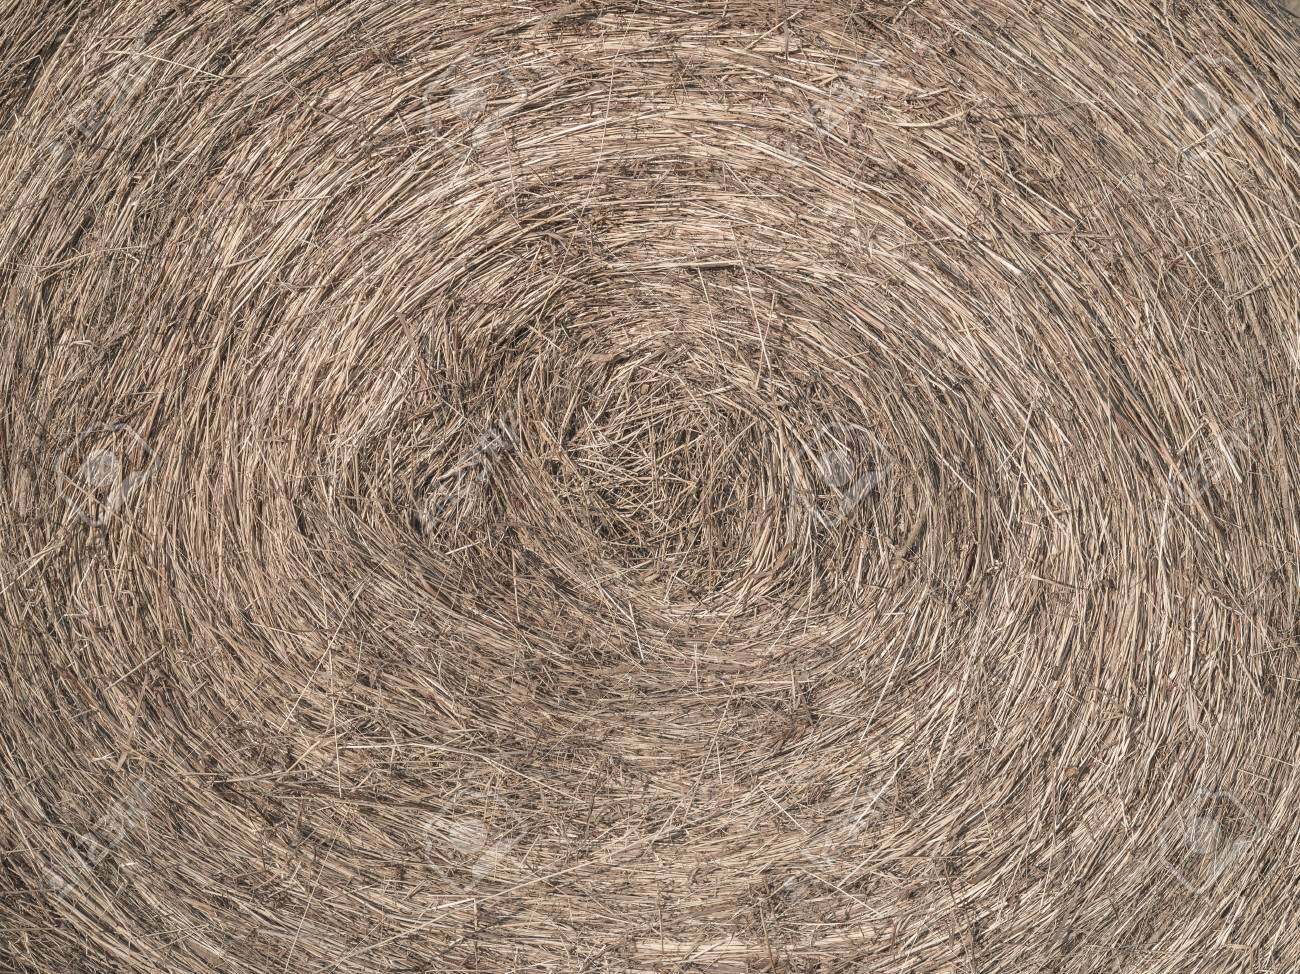 Round Bale Background Stock Photo Picture And Royalty Image